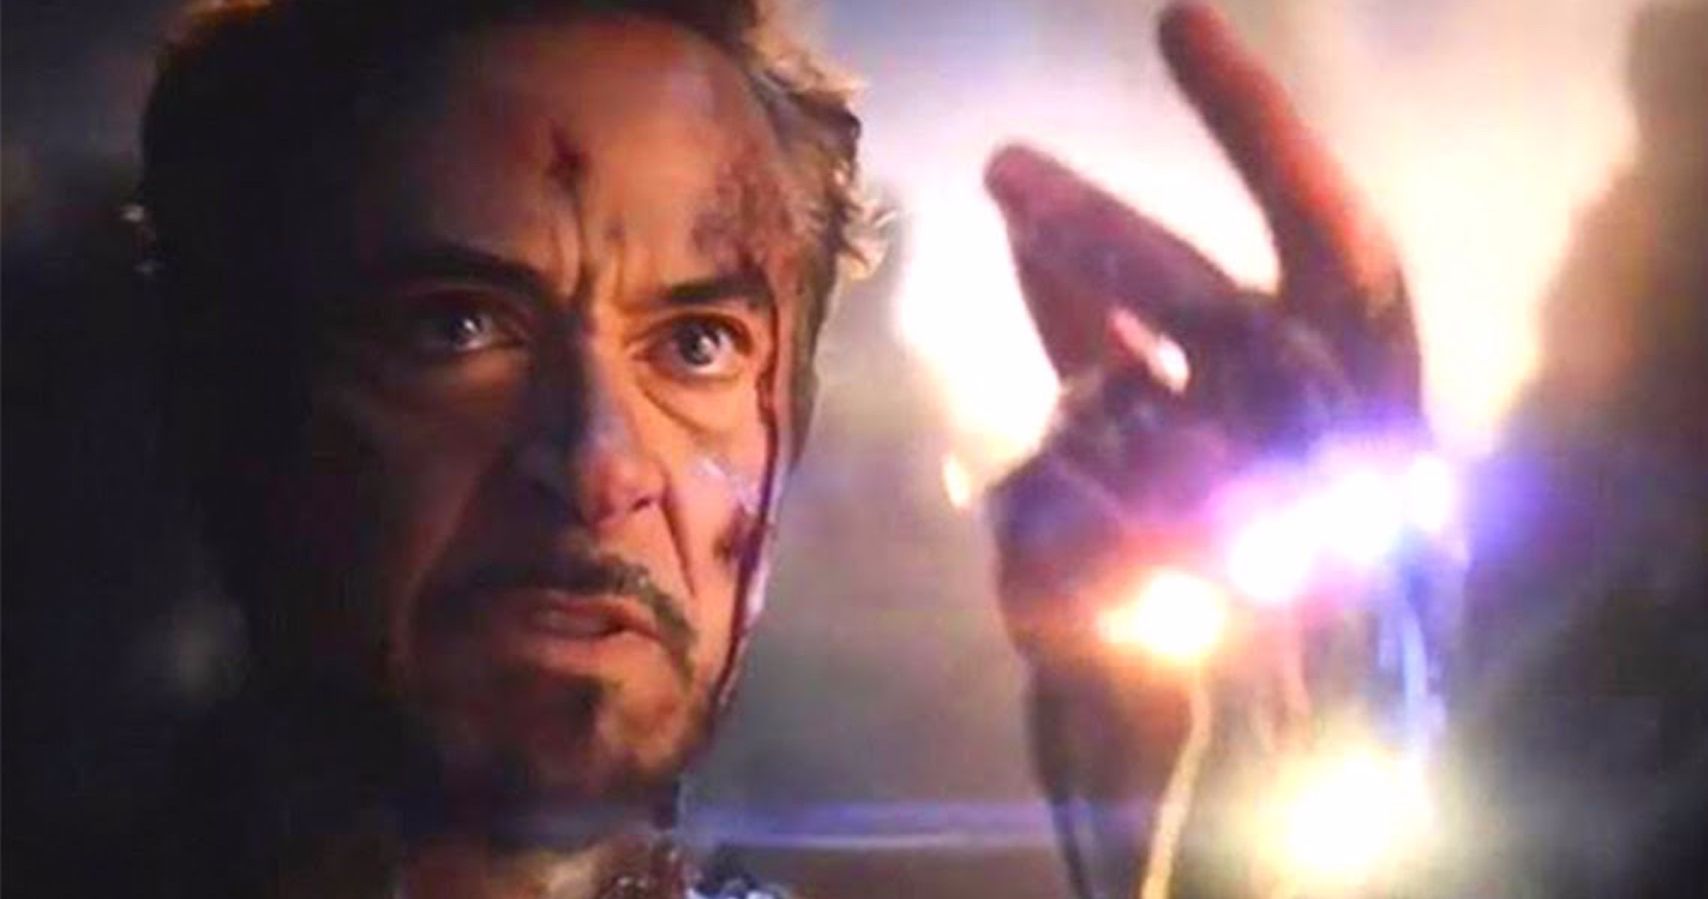 Avengers: Endgame Theory Turns Tony Stark Into a Super Soldier, But Some Fans Aren't Having It